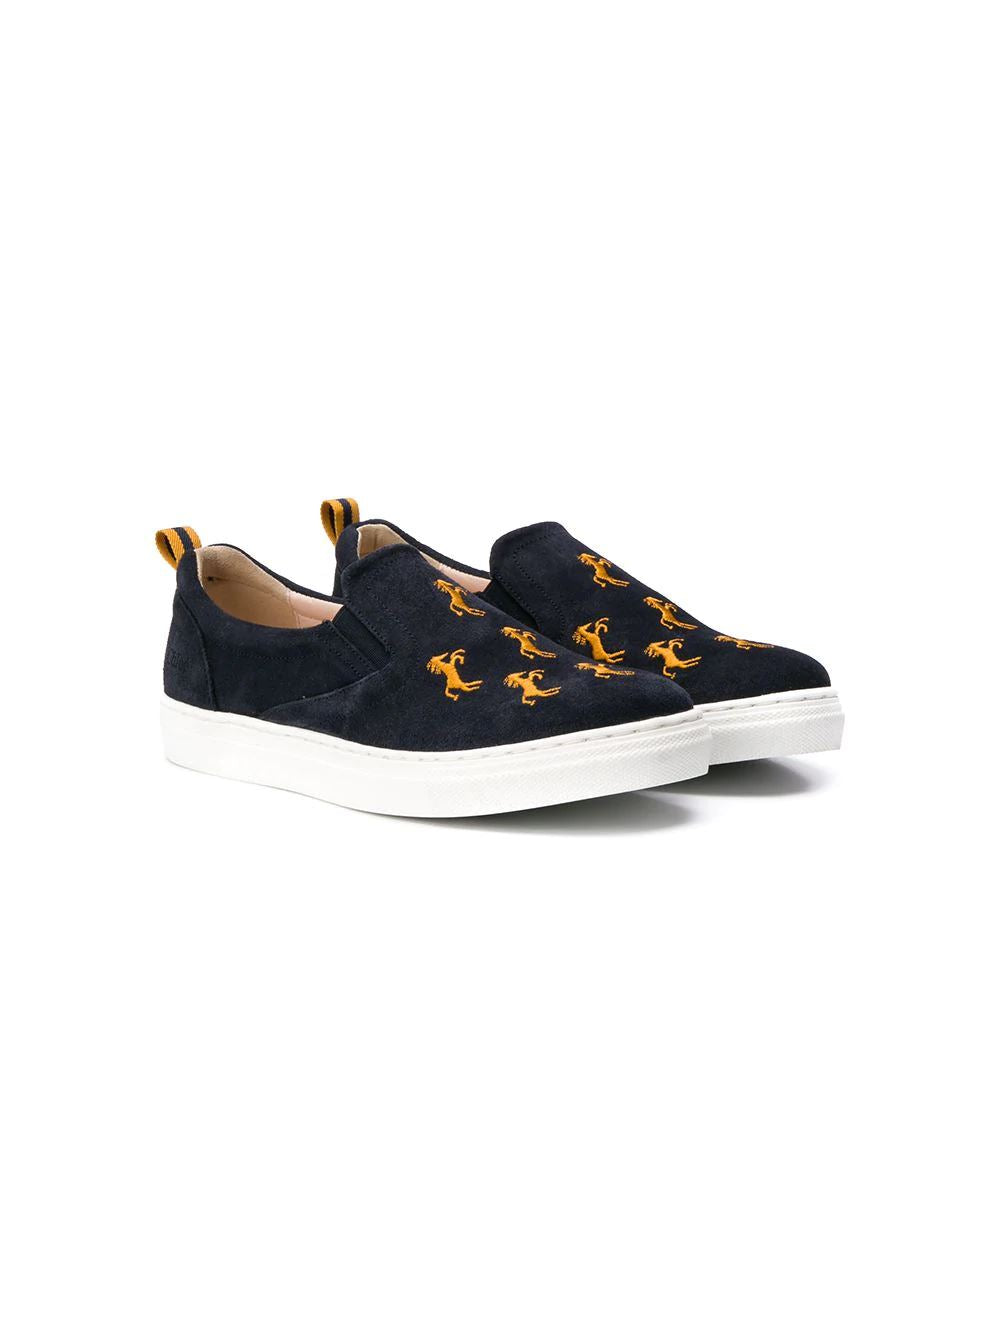 CHLOÉ KIDS embroidered sneakers Navy - Maison De Fashion 